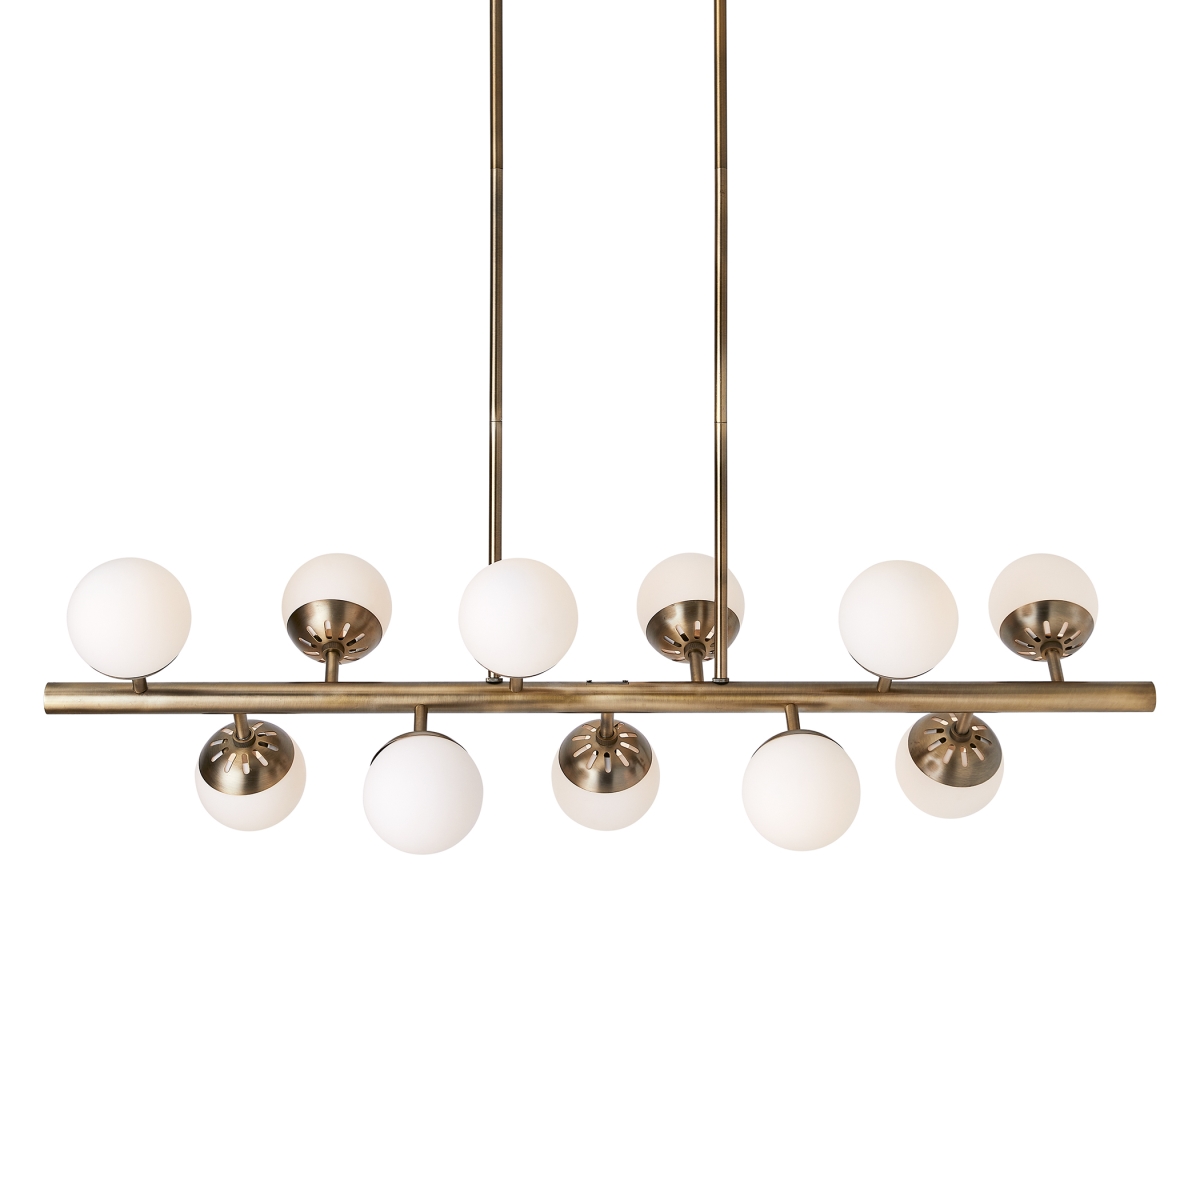 Picture of Uttermost 21358 52 in. Droplet 11 Light Linear Chandelier, Antique Brass